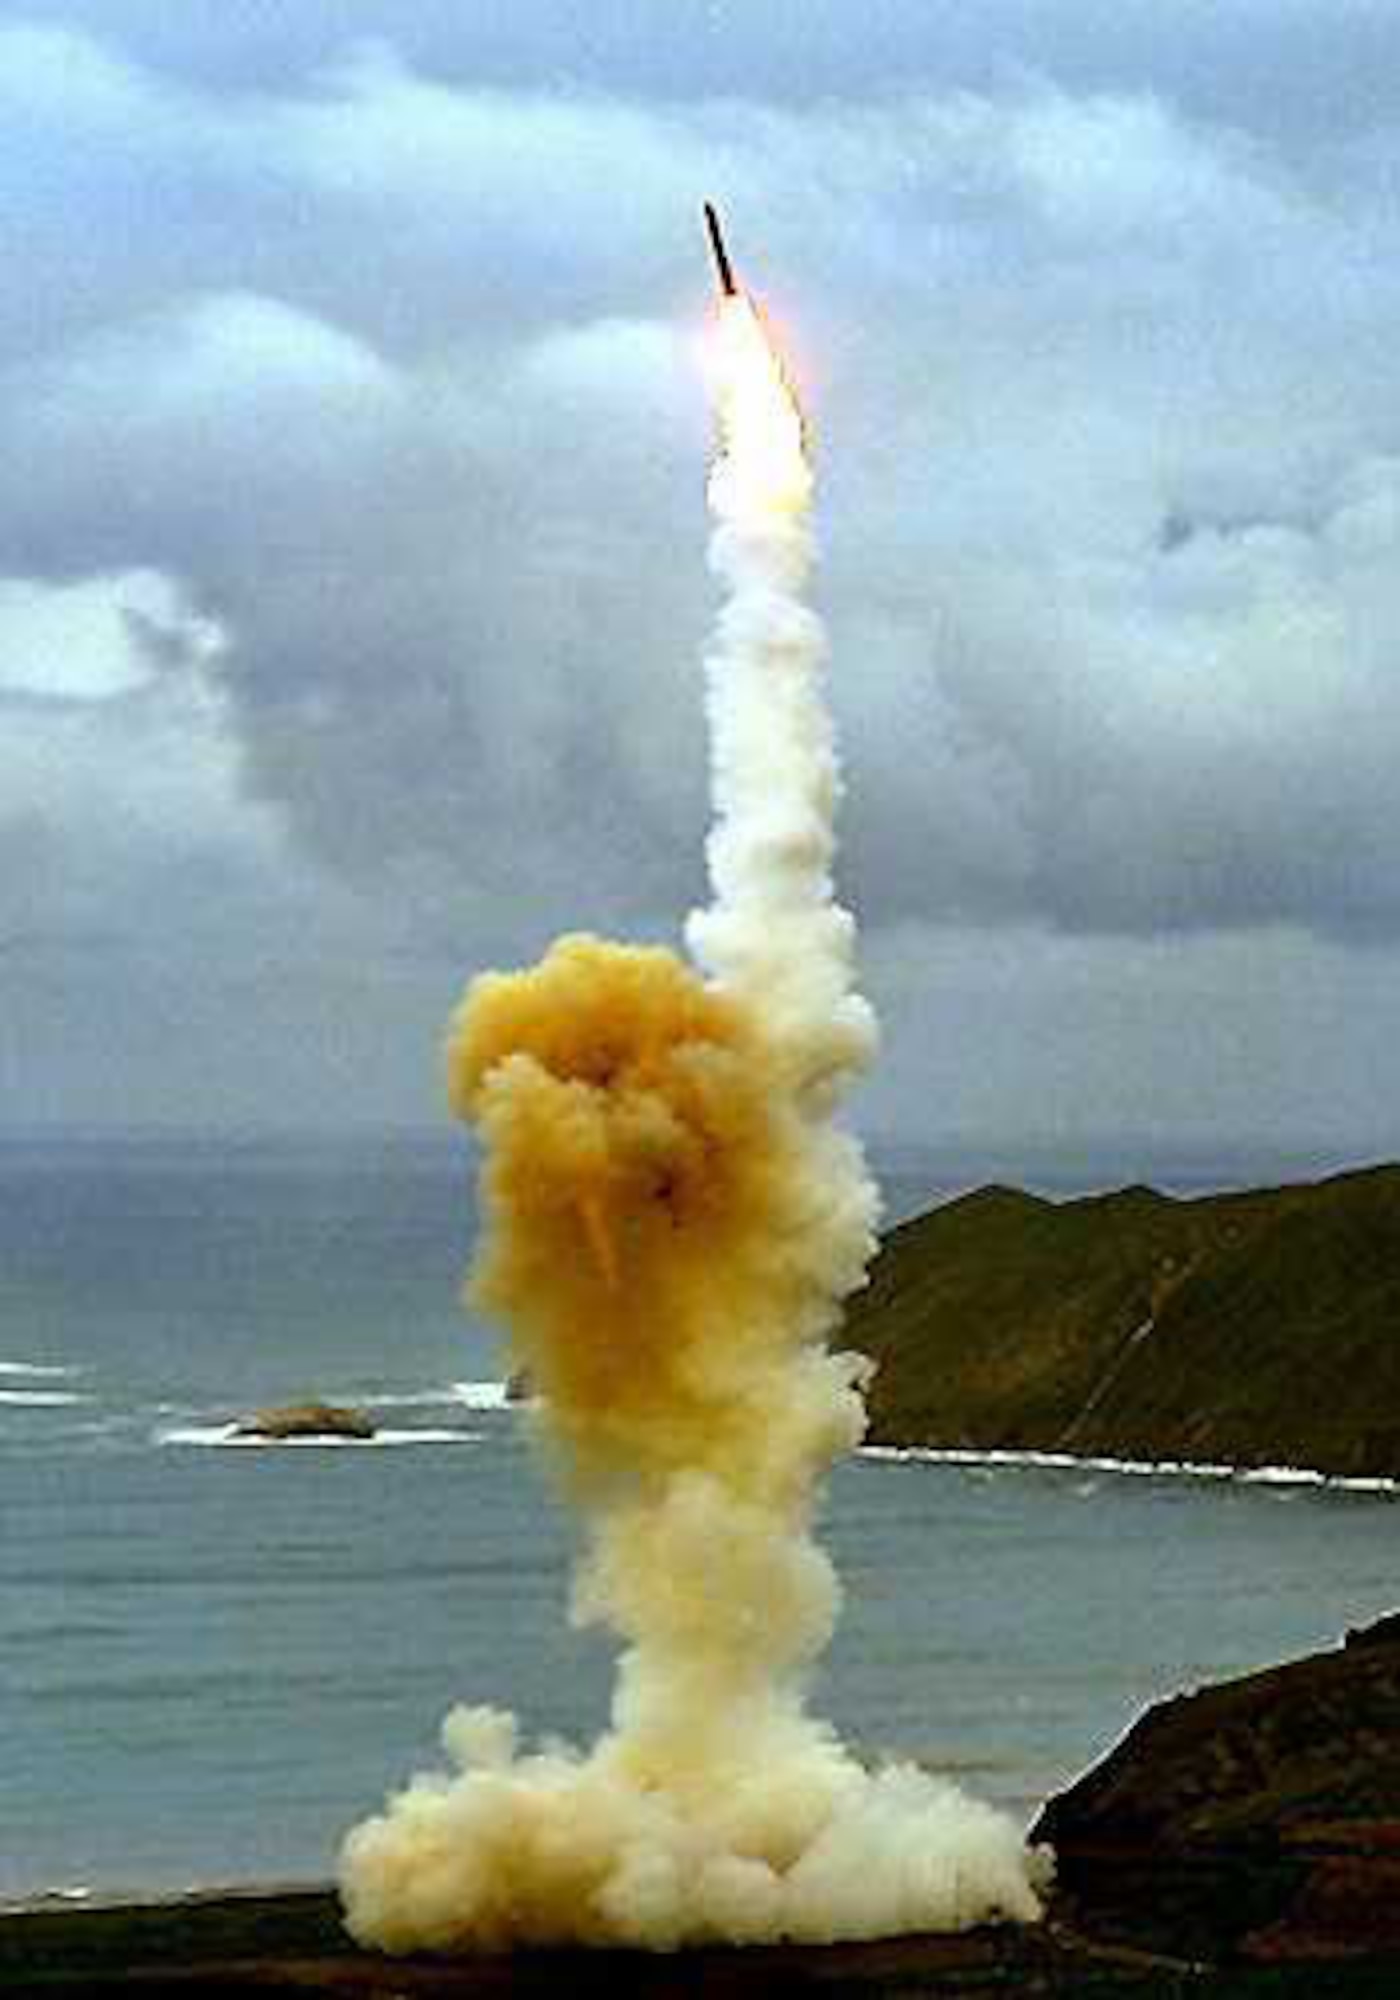 VANDENBERG AIR FORCE BASE, Calif.  -- An LGM-30 Minuteman III missile soars in the air after a test launch. The Minuteman is a strategic weapon system using a ballistic missile of intercontinental range. (U.S. Air Force photo)